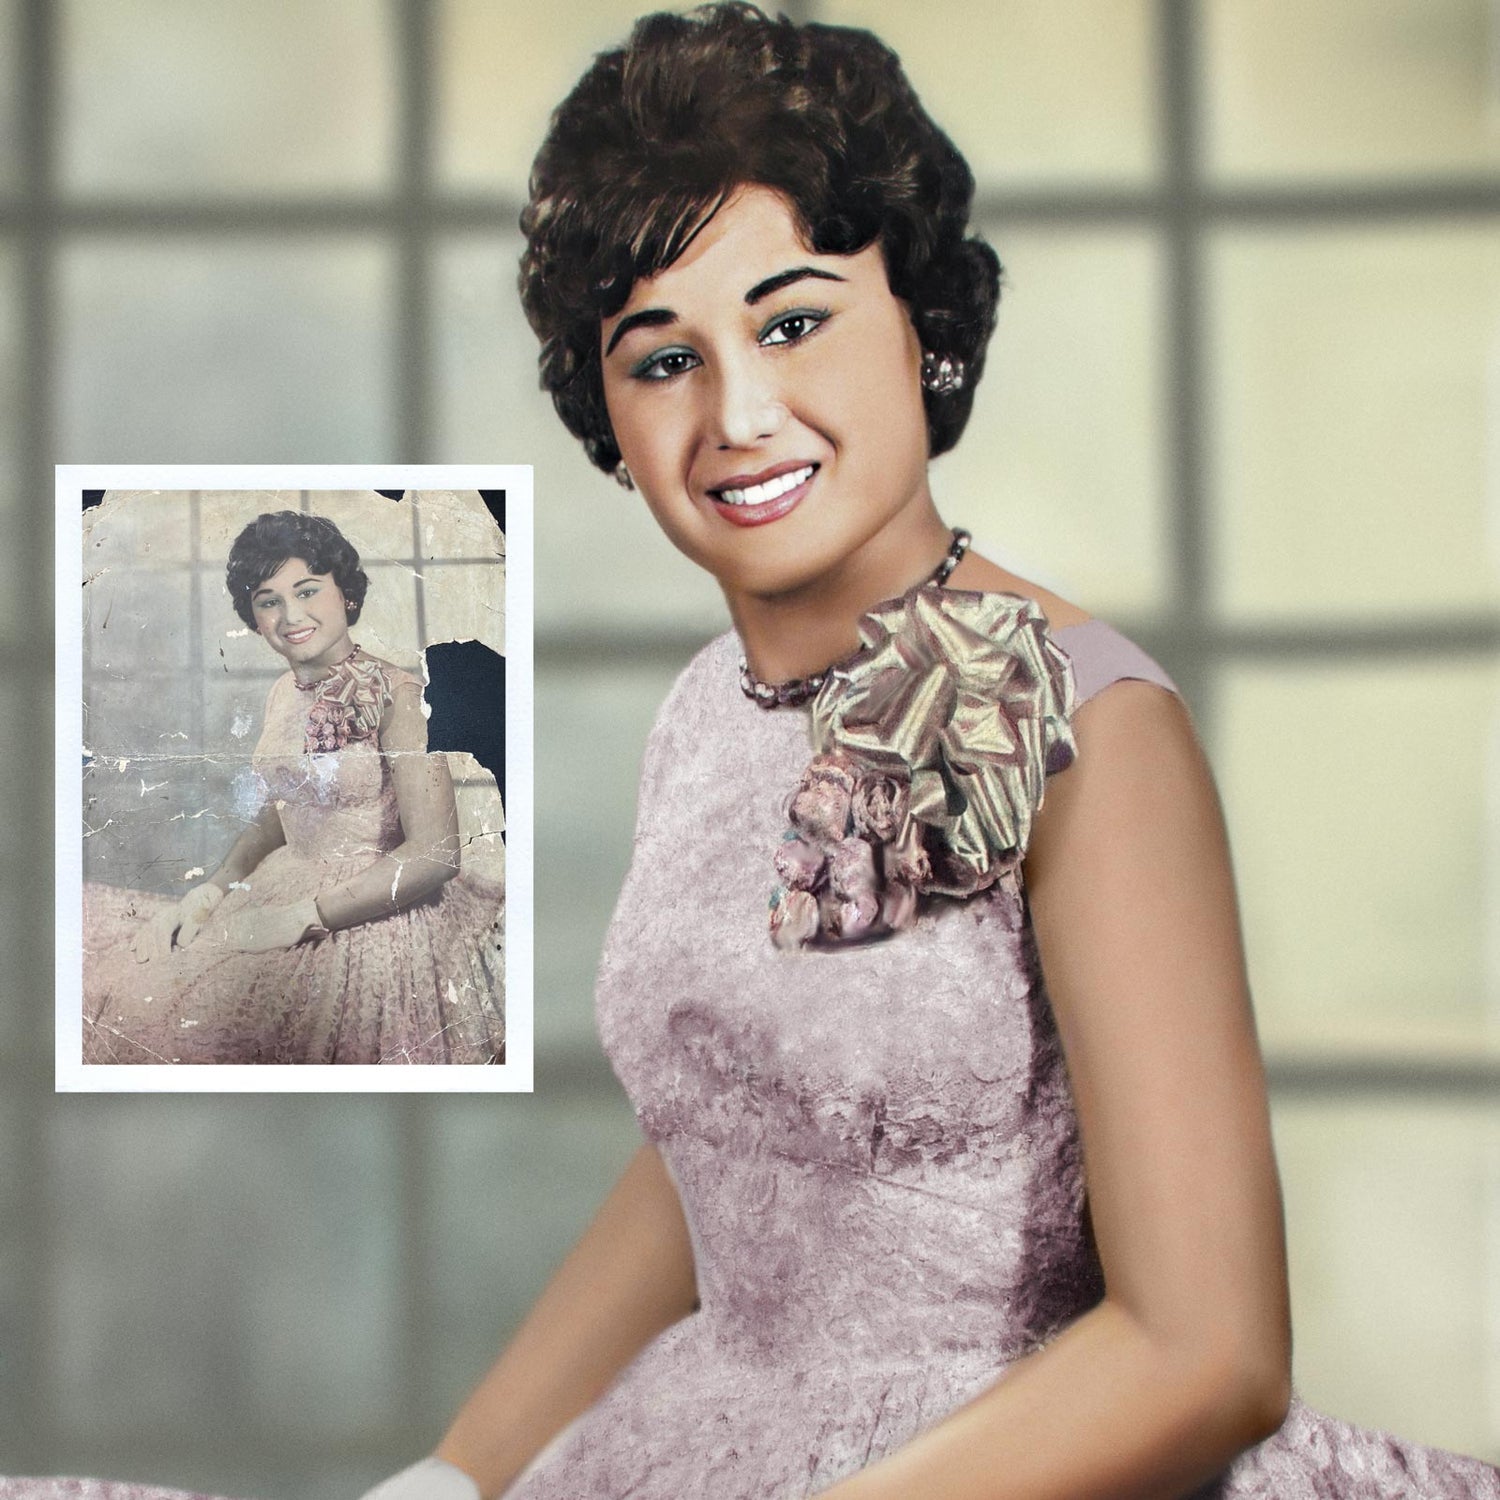 picture restoration done by professional photo restorers